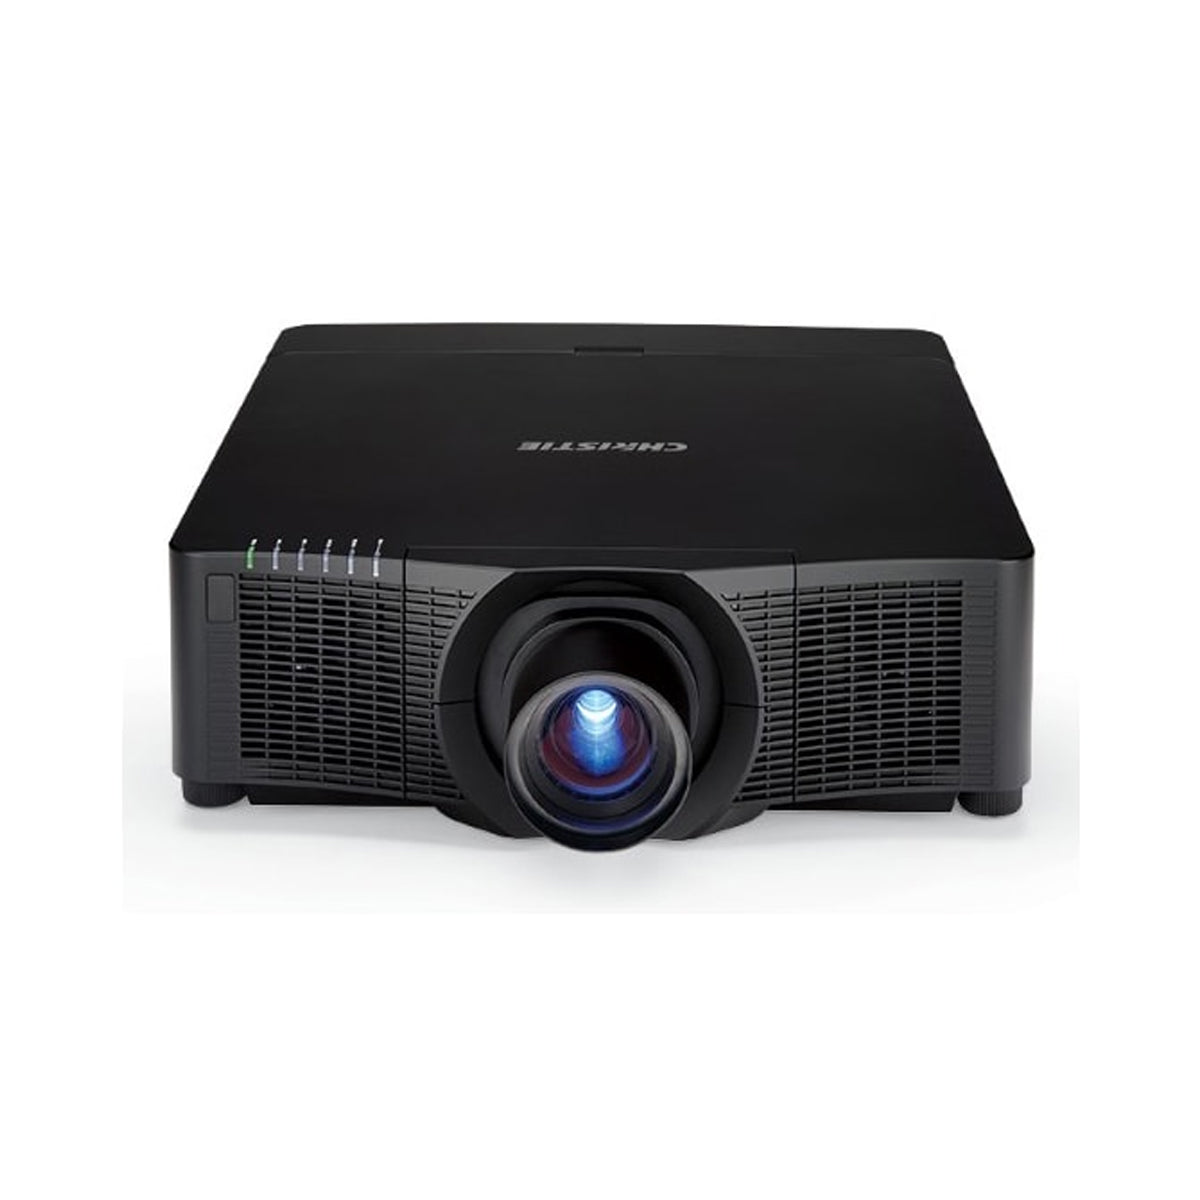 Christie LHD720i Projector (Black) (Body only) 3LCD, HD, 7,650 ISO lumens, single lamp